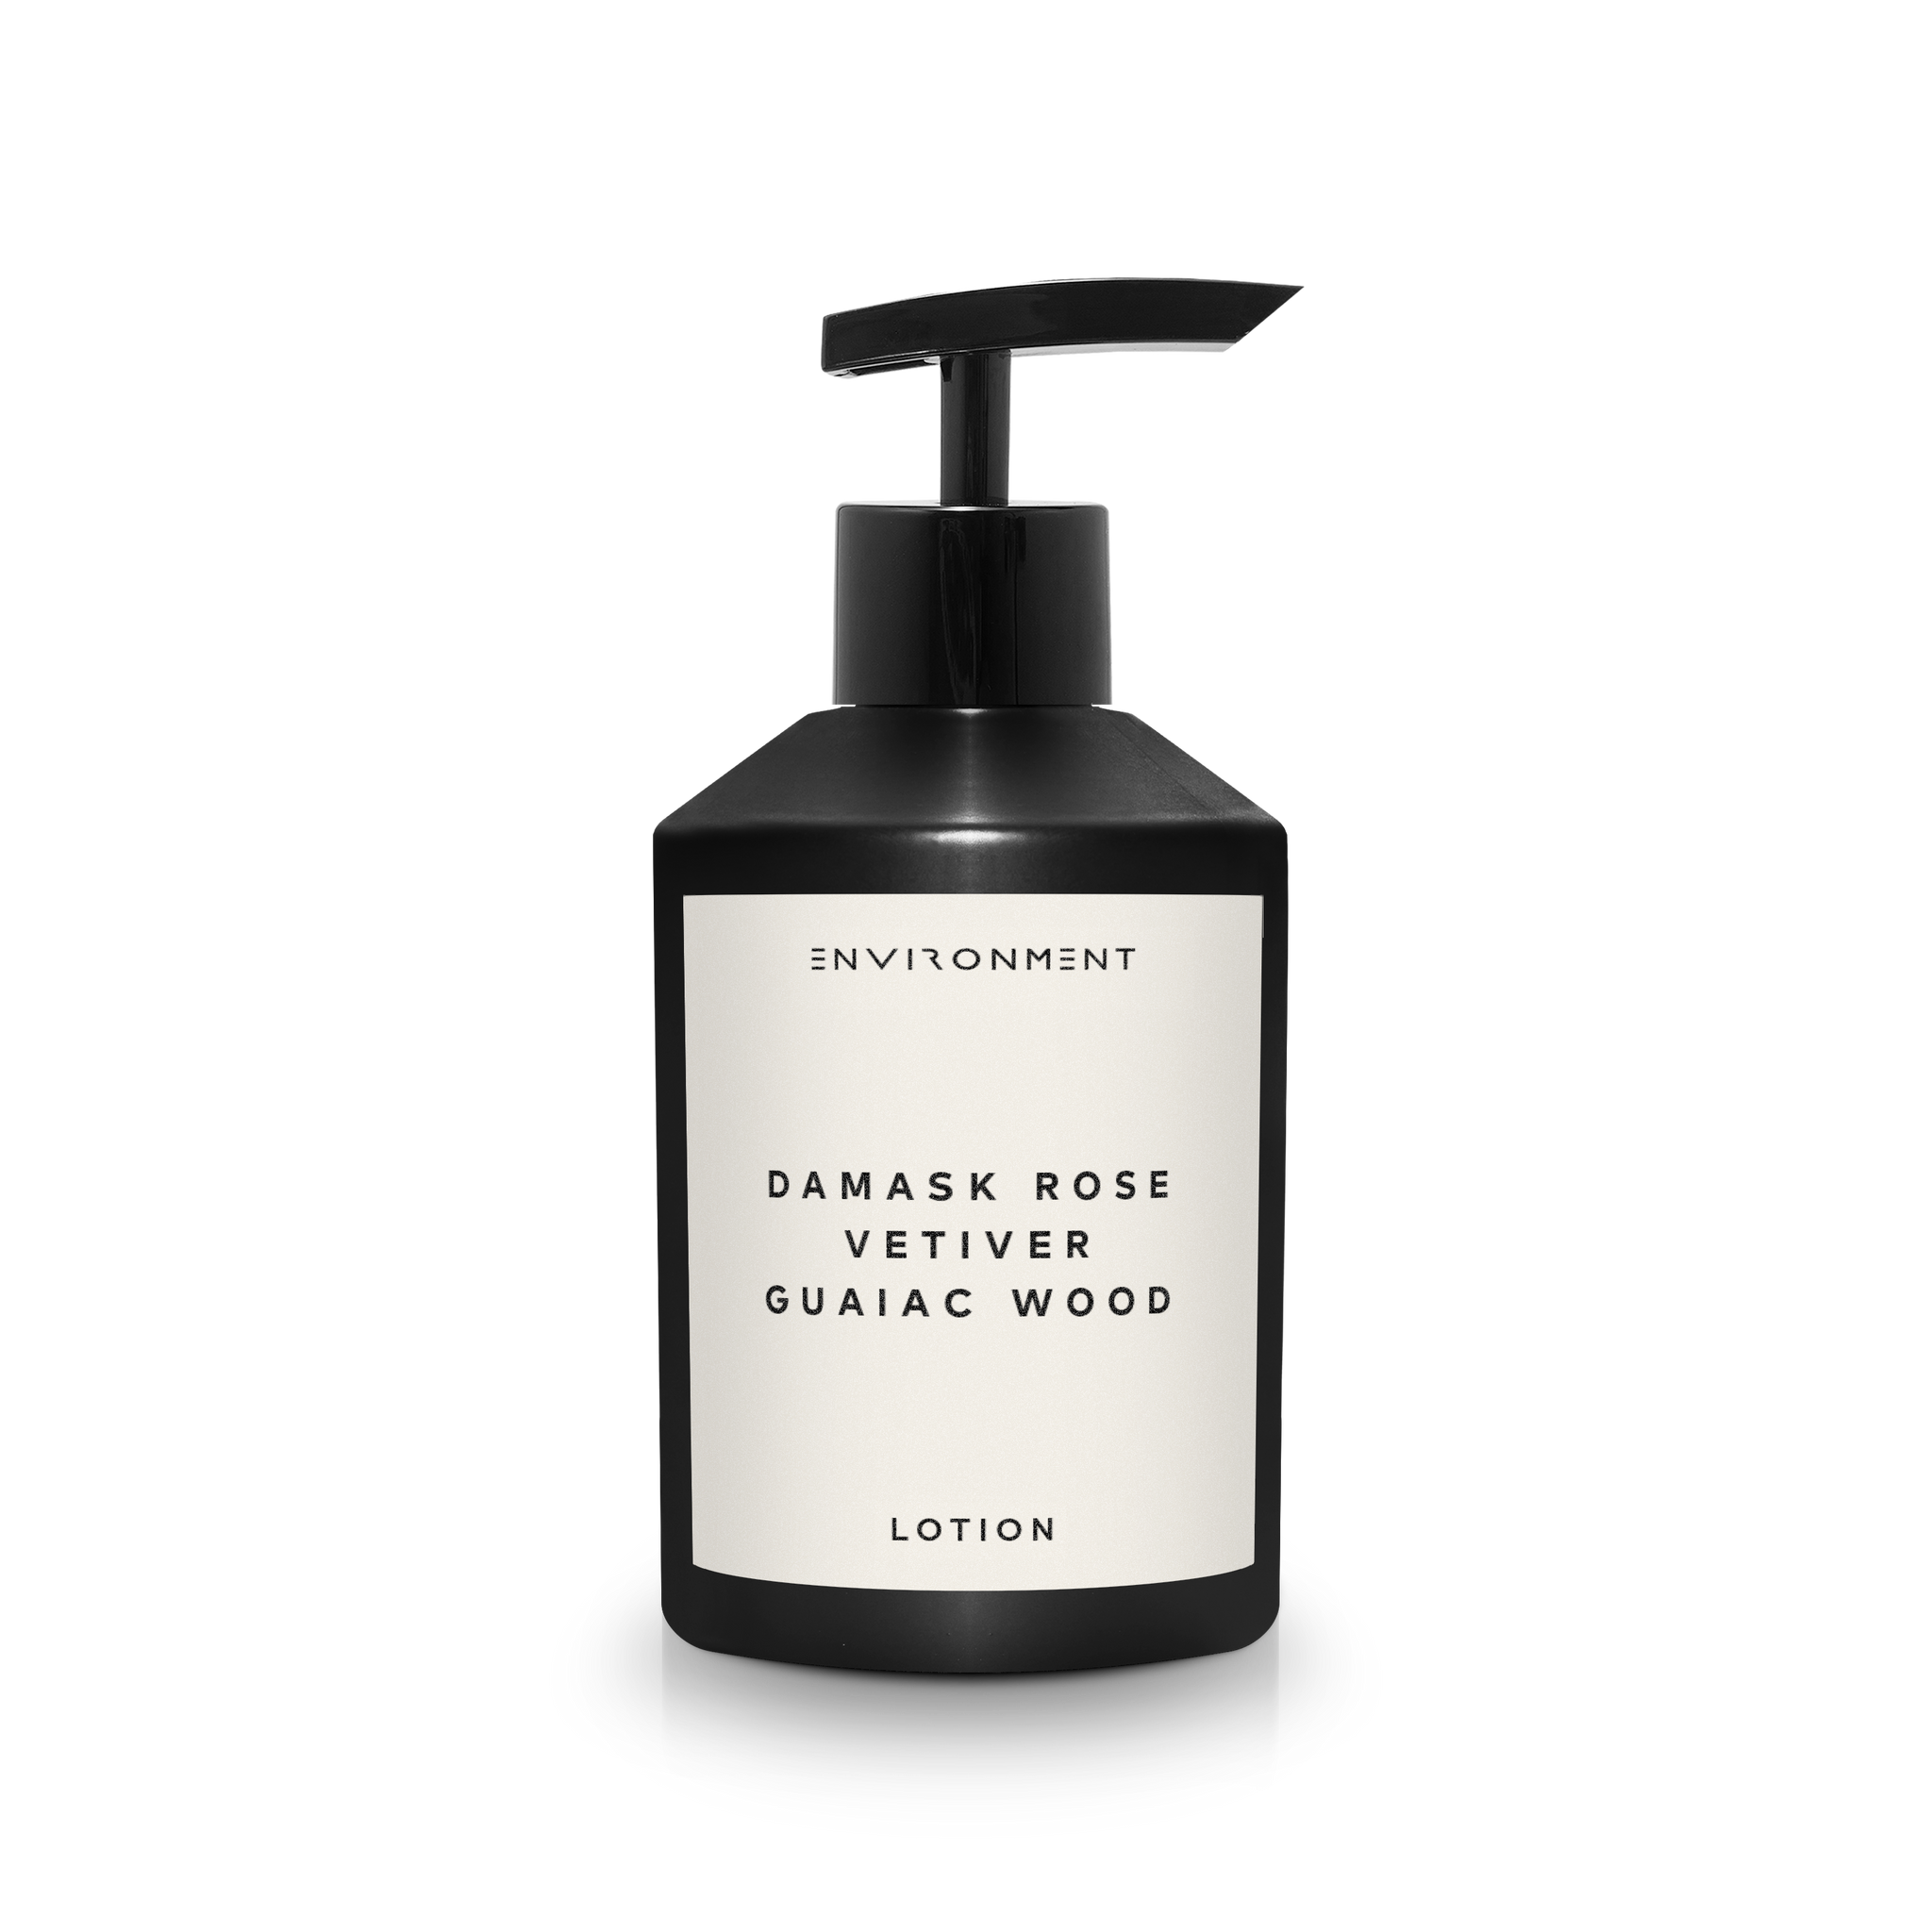 Damask Rose | Vetiver | Guaiac Wood Lotion (Inspired by Le Labo Rose 31® and Fairmont Hotel®)